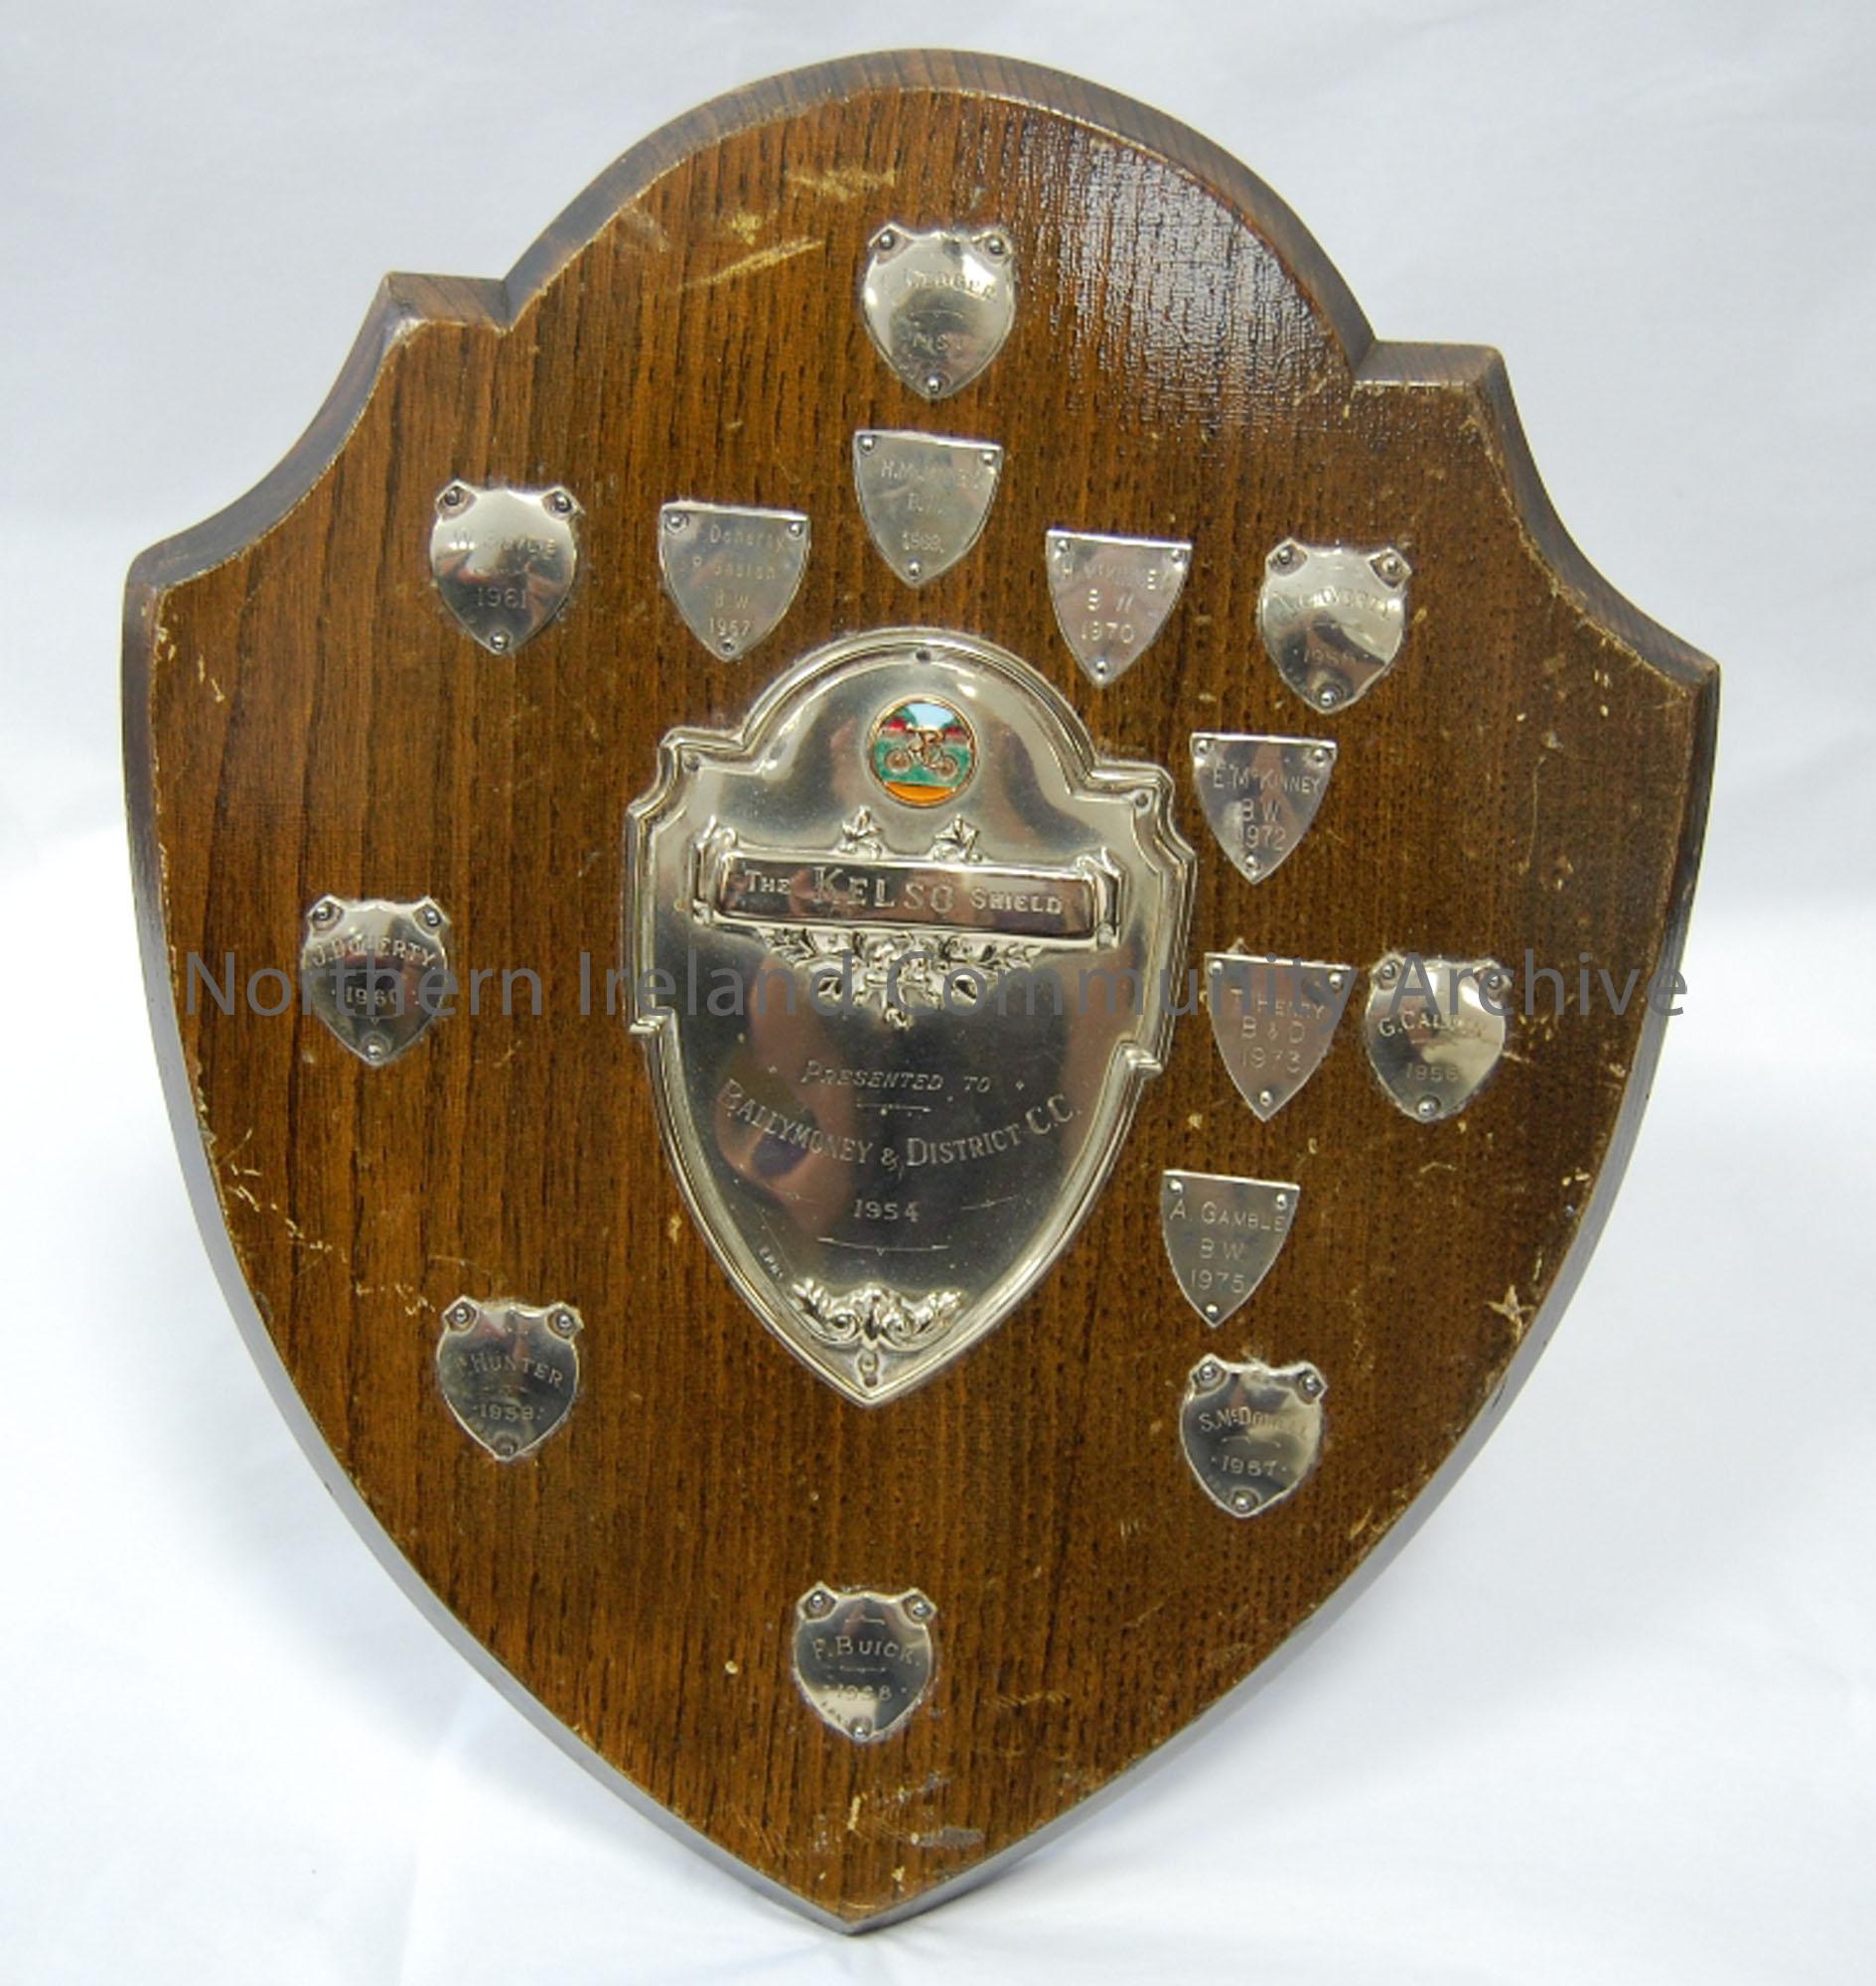 Wooden shield with smaller metal plaques naming winners of shield 1954-1975. Central shield engraved ‘The Kelso shield presented to Ballymoney & Distr…